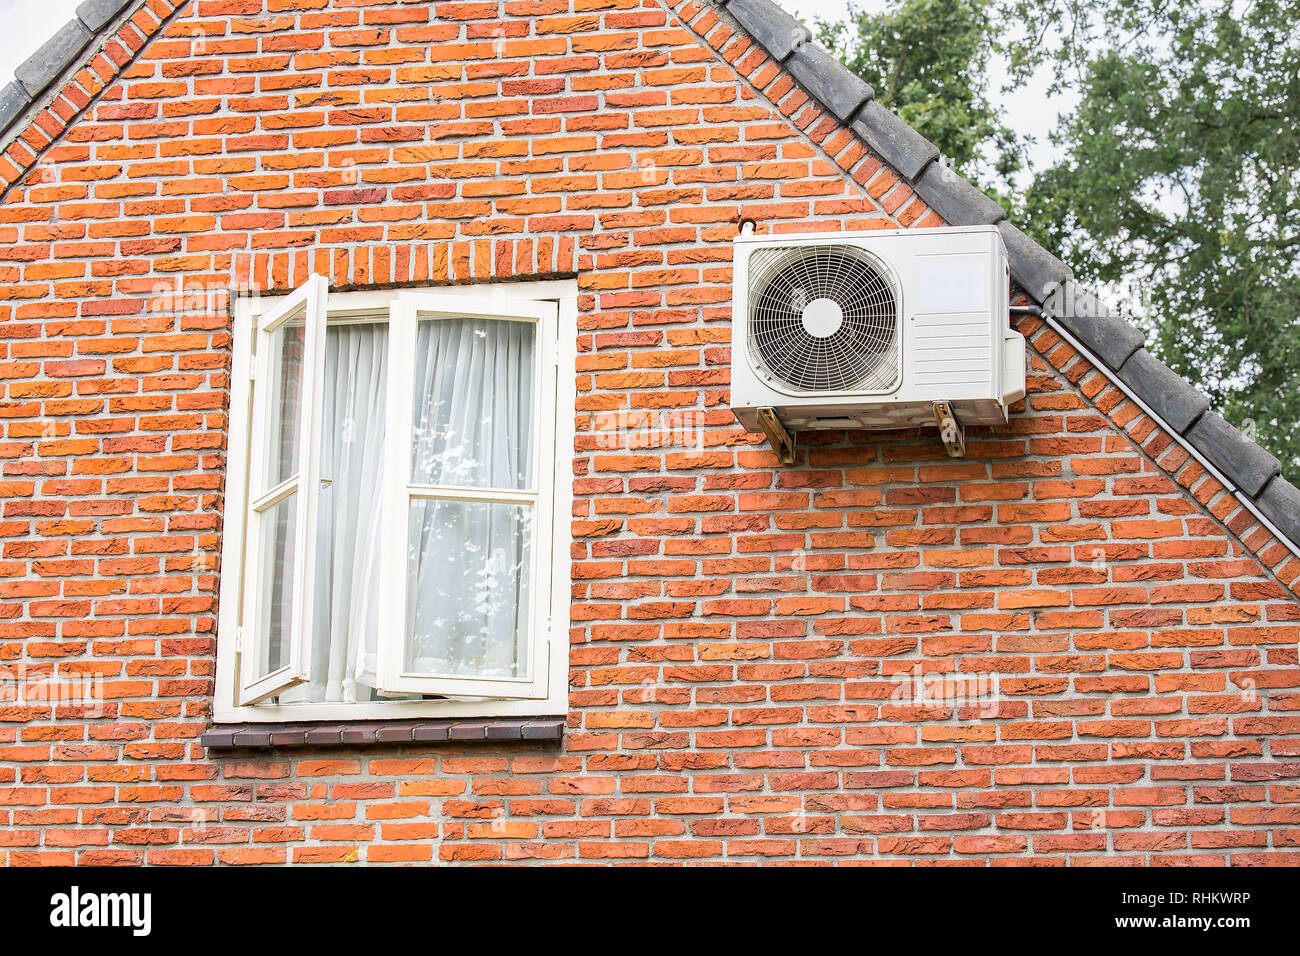 Brick wall of home with window and air conditioner Stock Photo